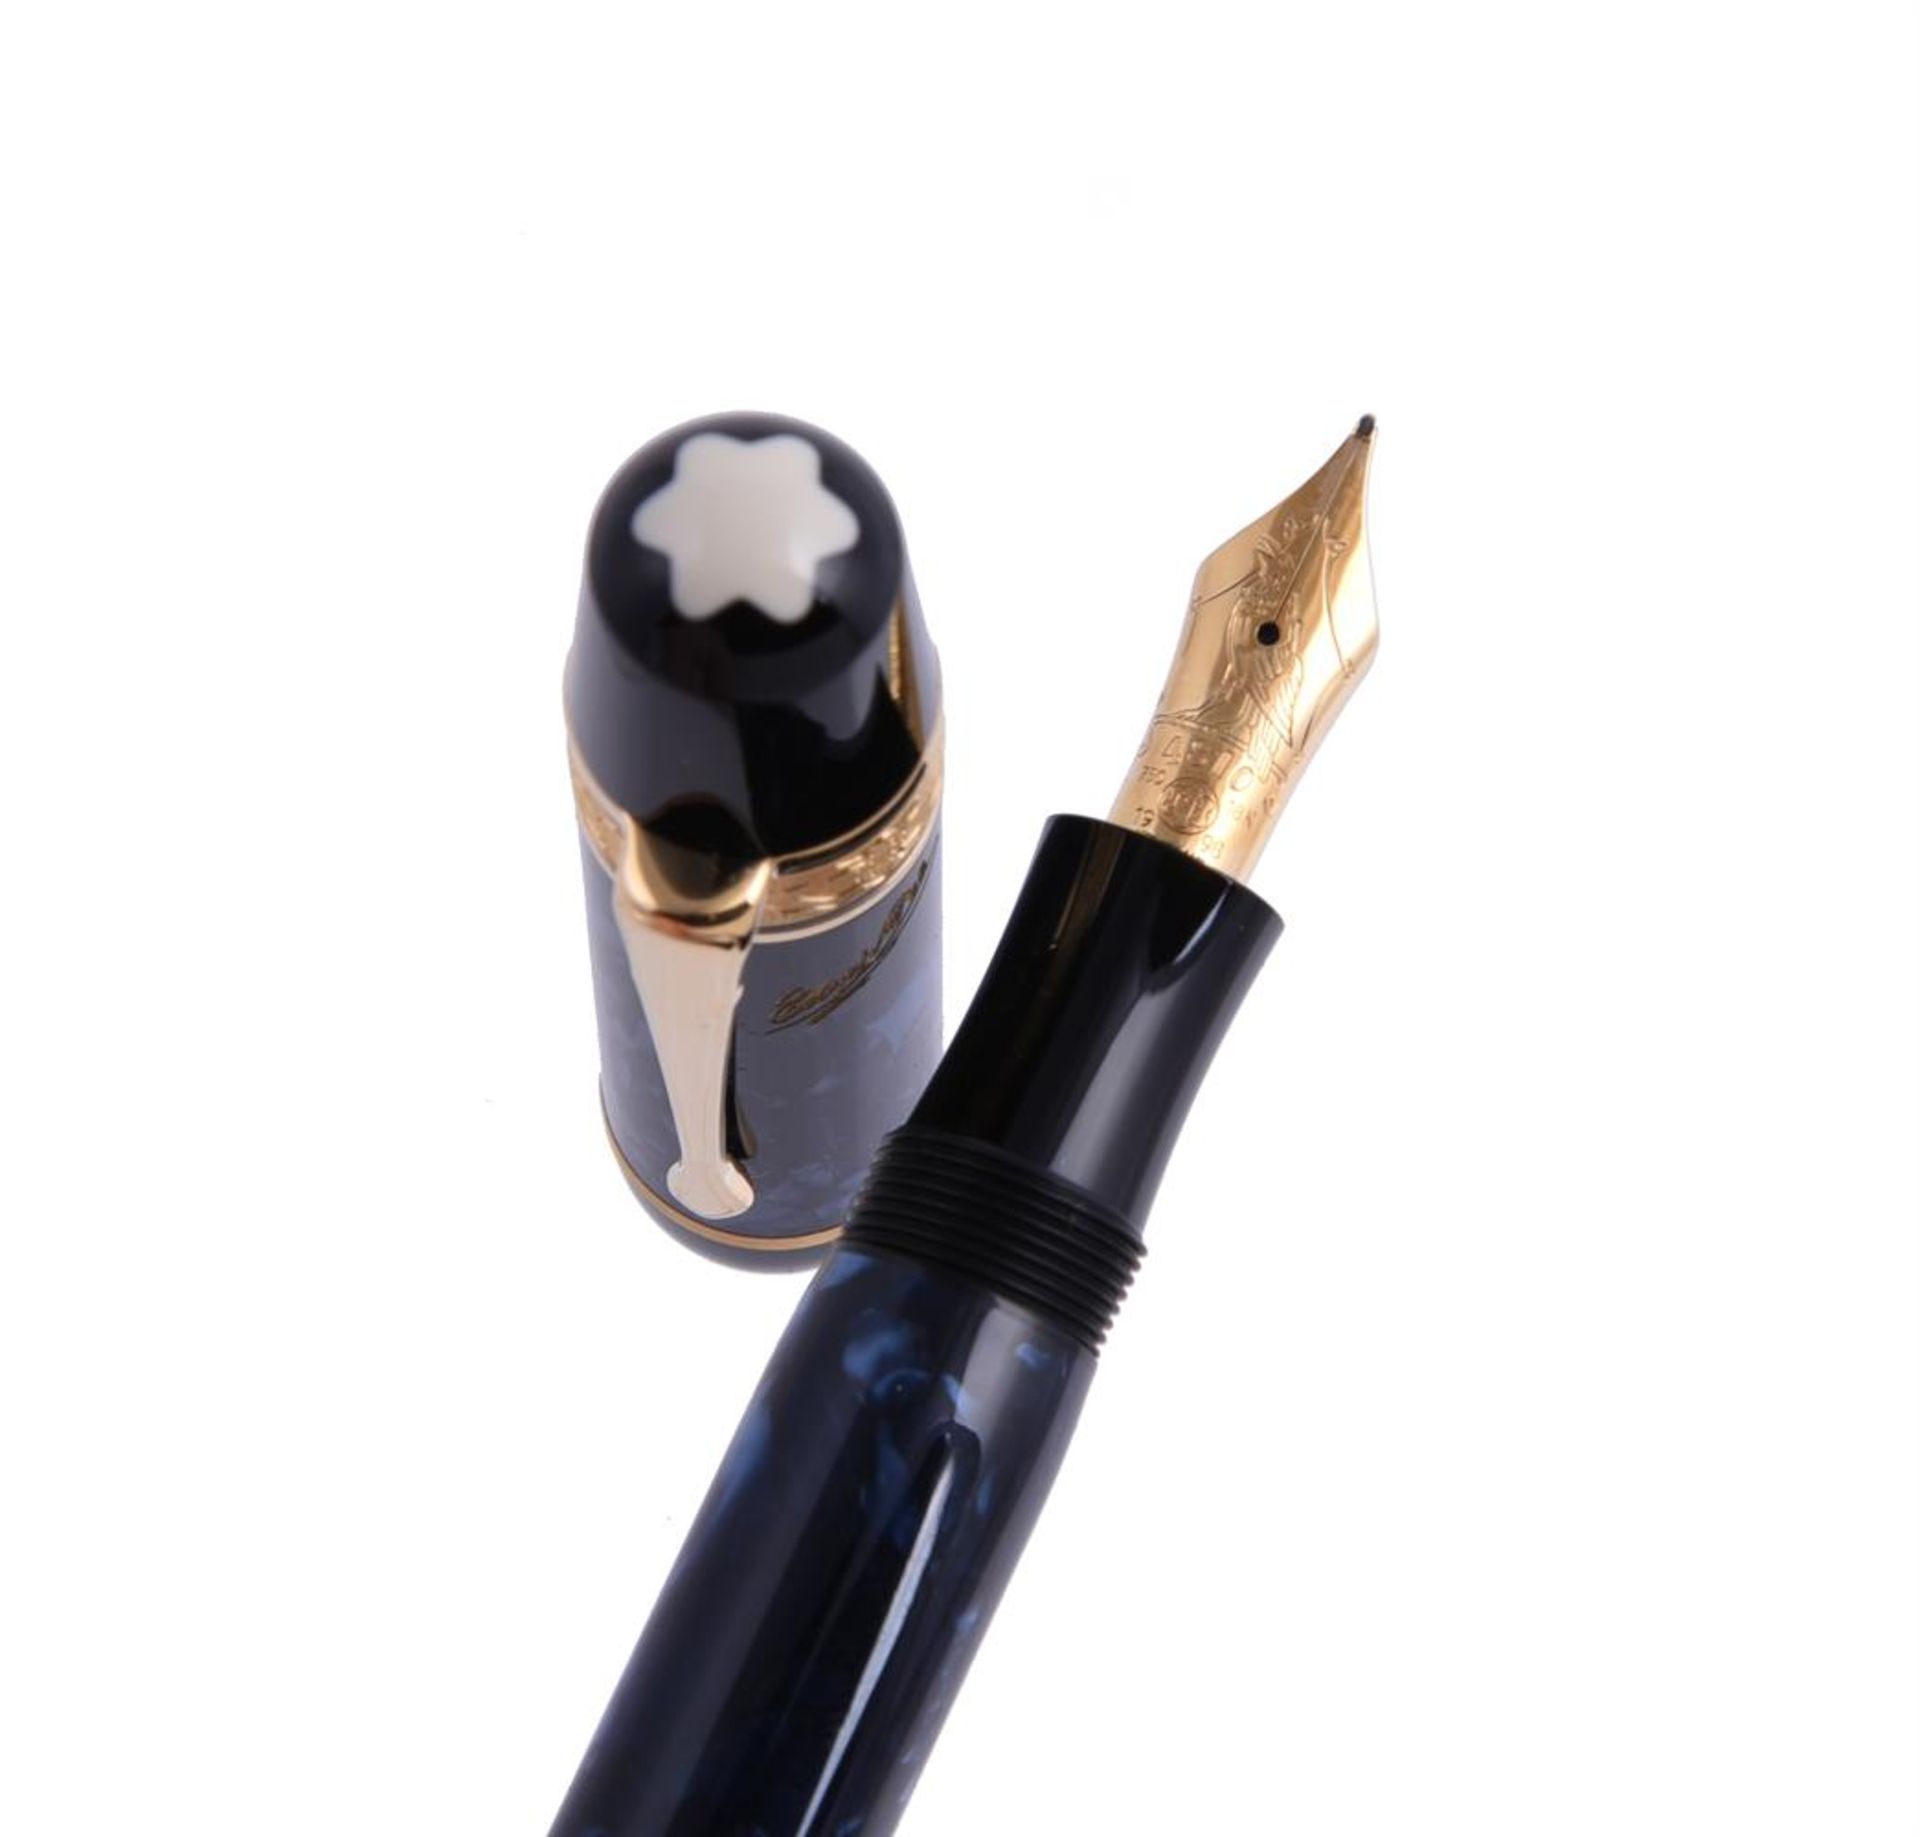 MONTBLANC, WRITERS EDITION, EDGAR ALLAN POE, A LIMITED EDITION FOUNTAIN PEN - Image 2 of 3